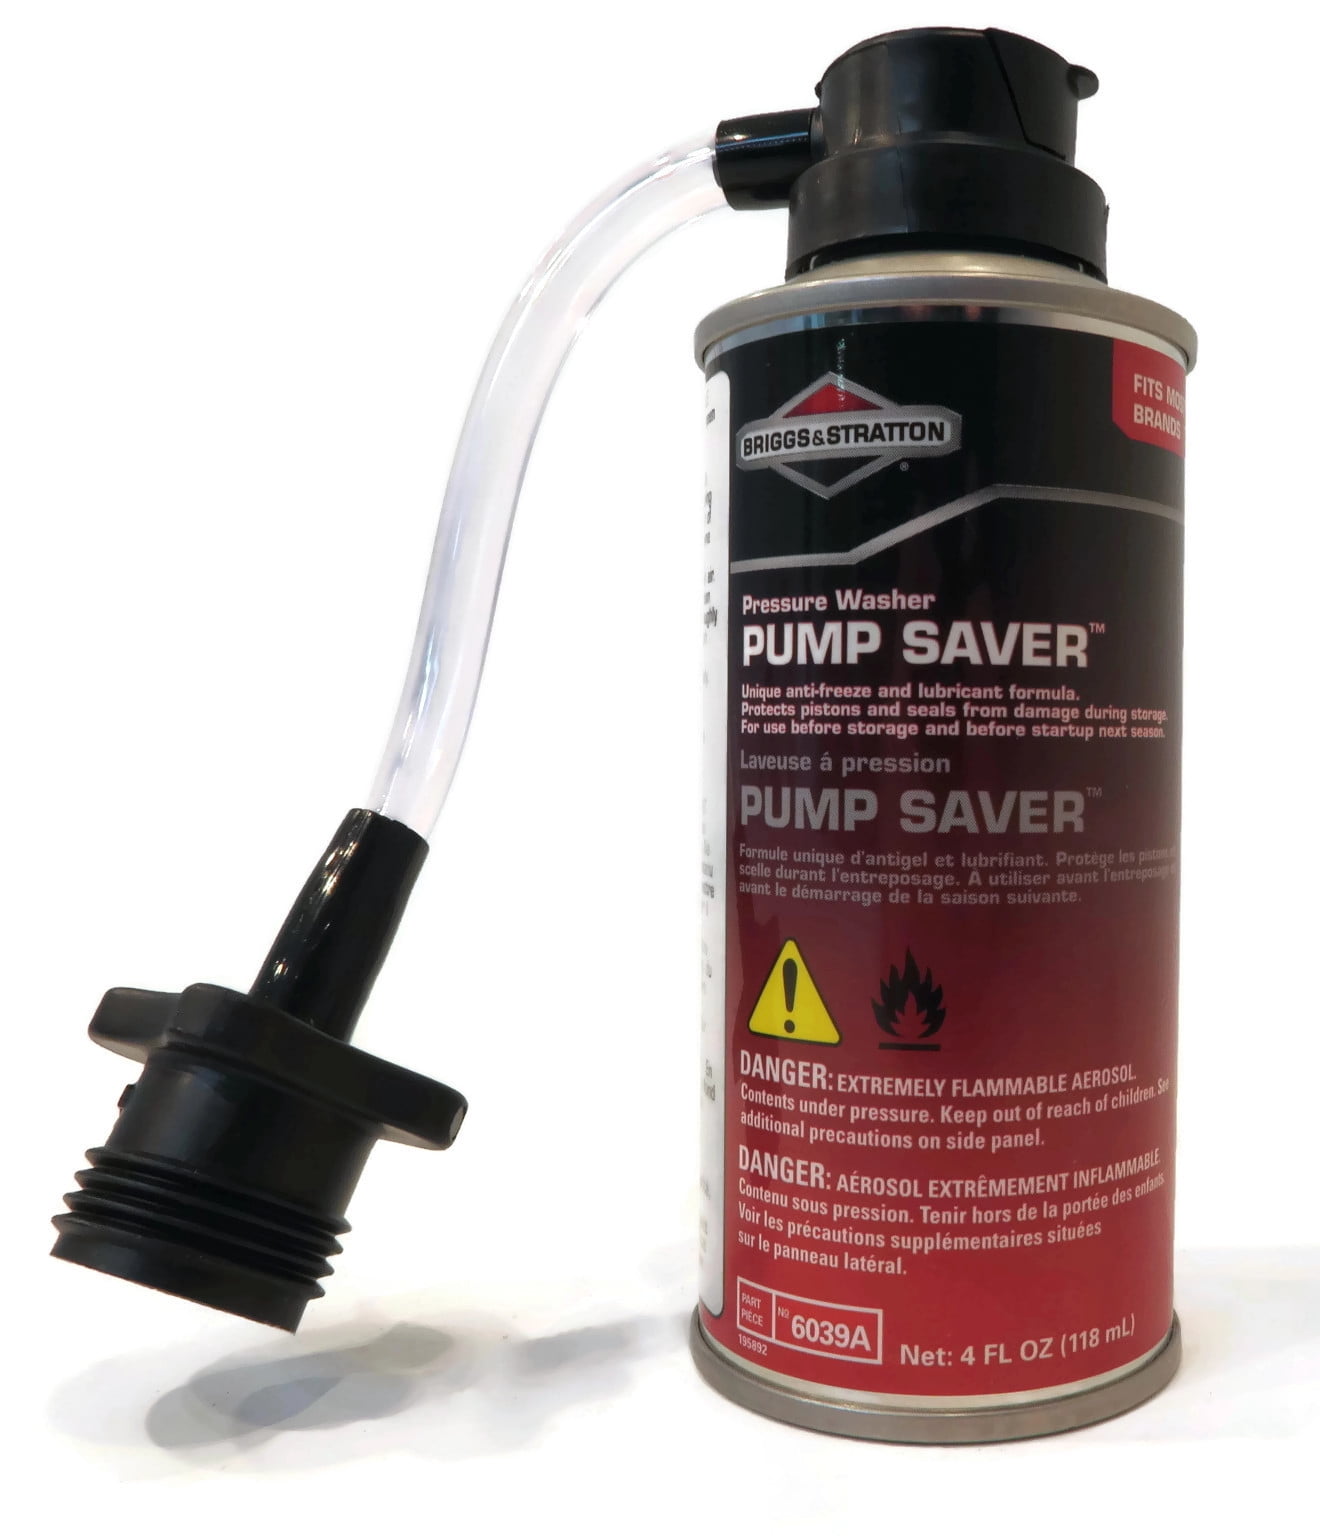 PUMP SAVER for Power Pressure Washer Water Pump 2800 psi 2.3 gpm fit Many Models 